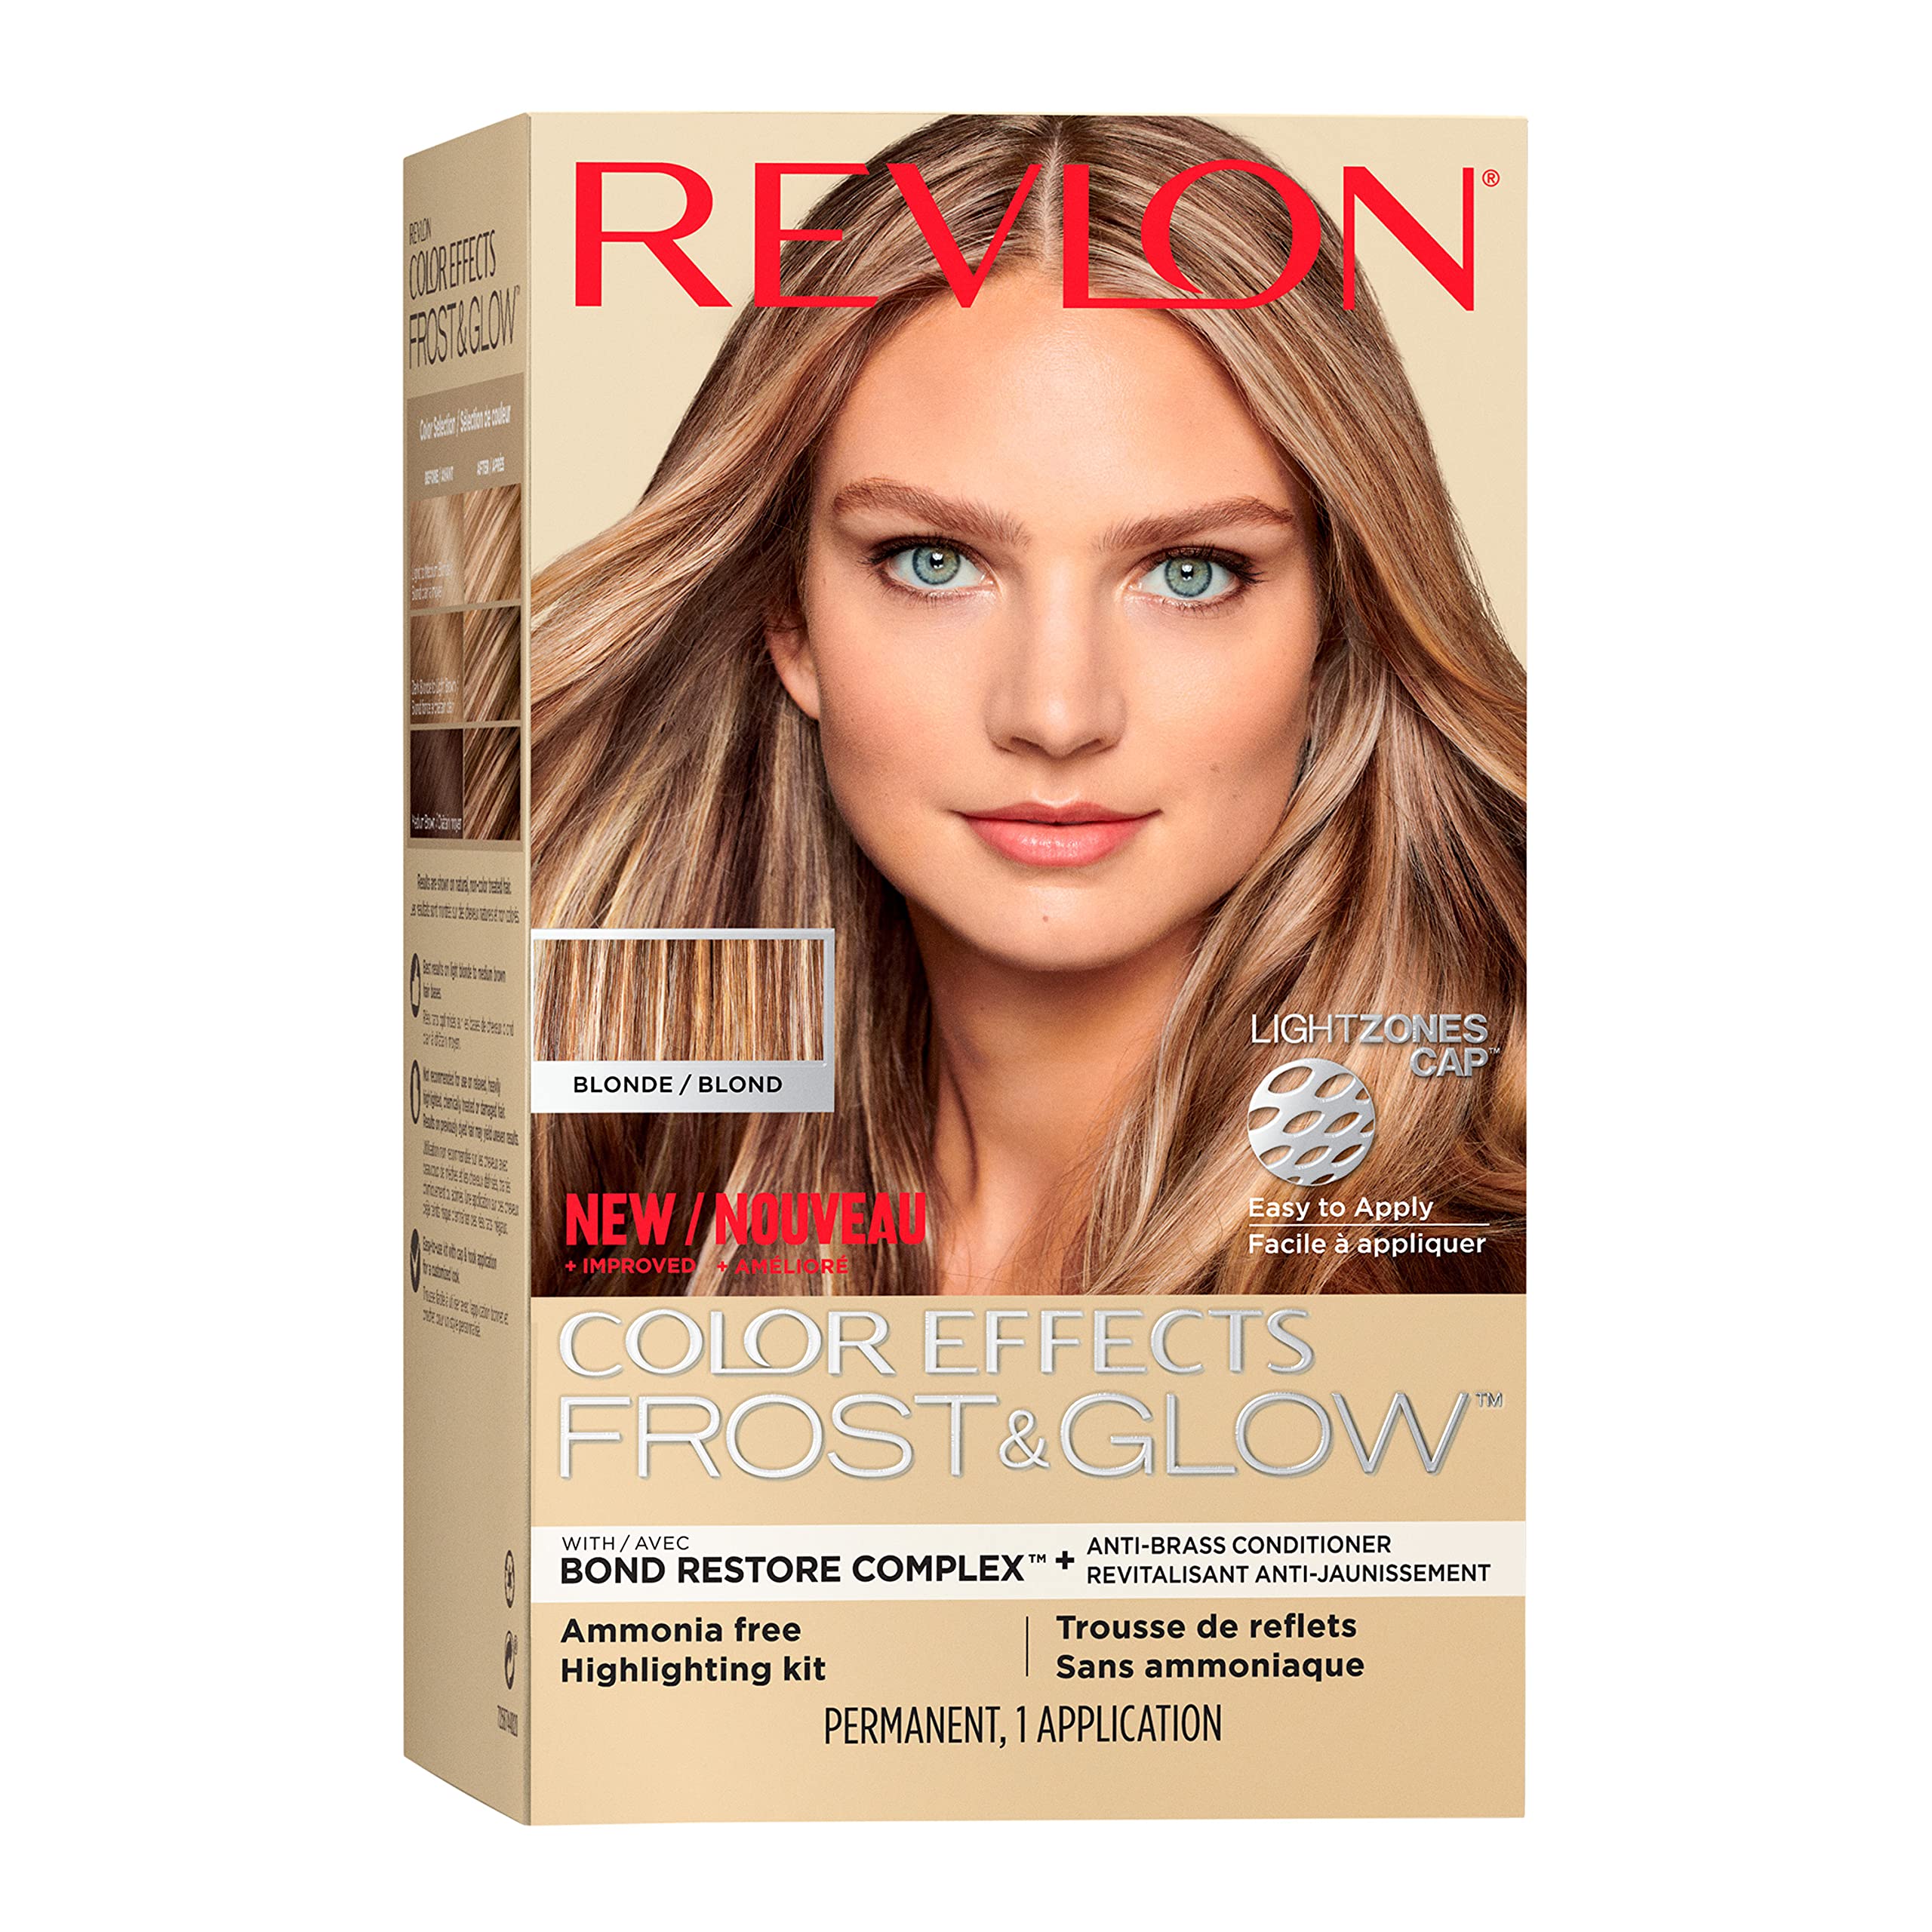 Permanent Hair Color by Revlon, Permanent Hair Dye, Color Effects  Highlighting Kit, Ammonia Free & Paraben Free, 20 Blonde, 8 Oz, (Pack of 1)